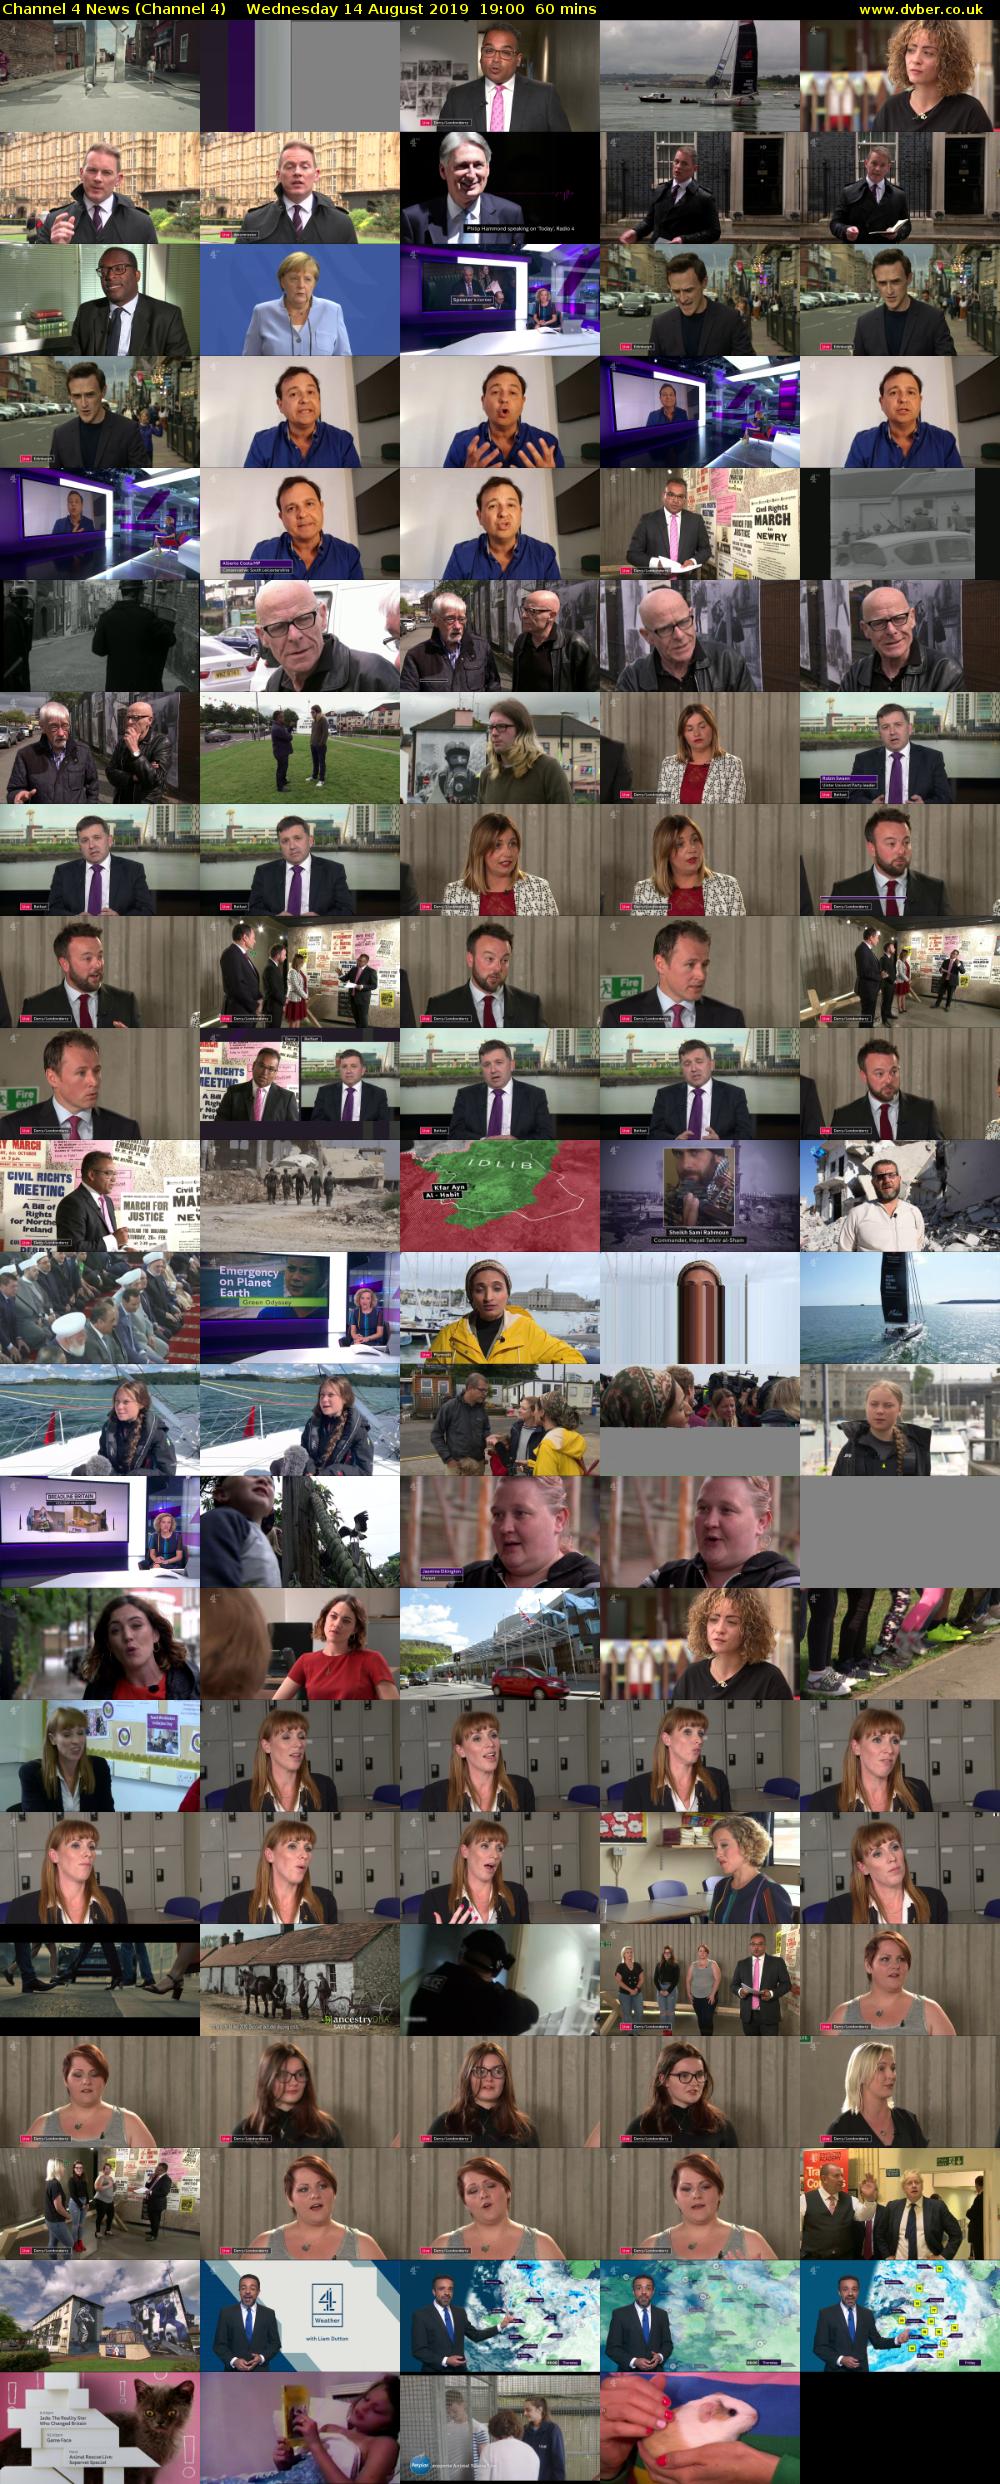 Channel 4 News (Channel 4) Wednesday 14 August 2019 19:00 - 20:00